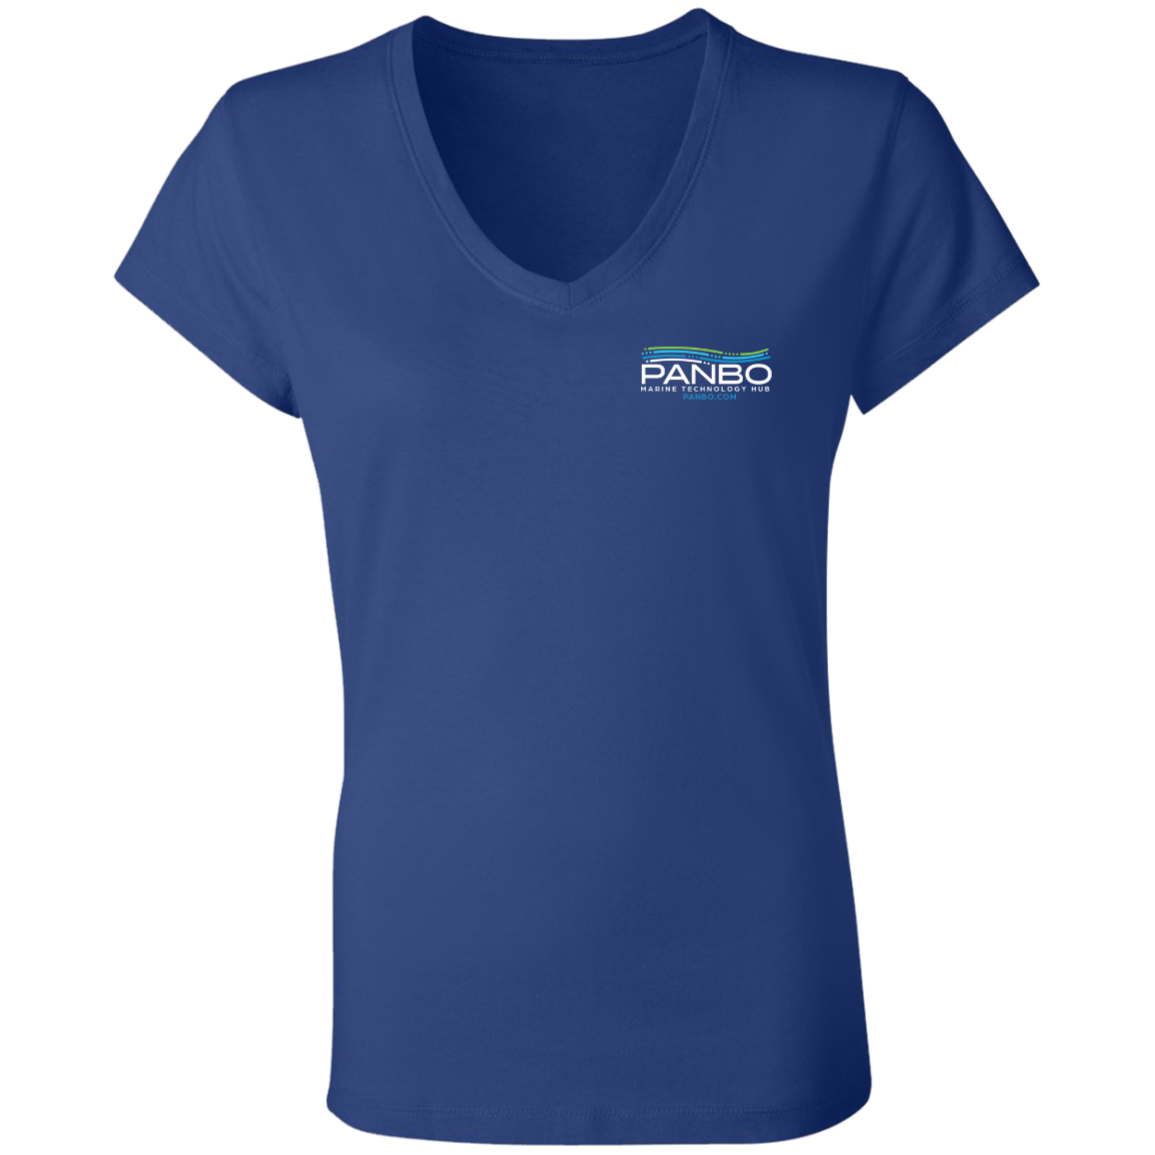 Panbo - Bella and Canvas Women's V-Neck Logo T-Shirt